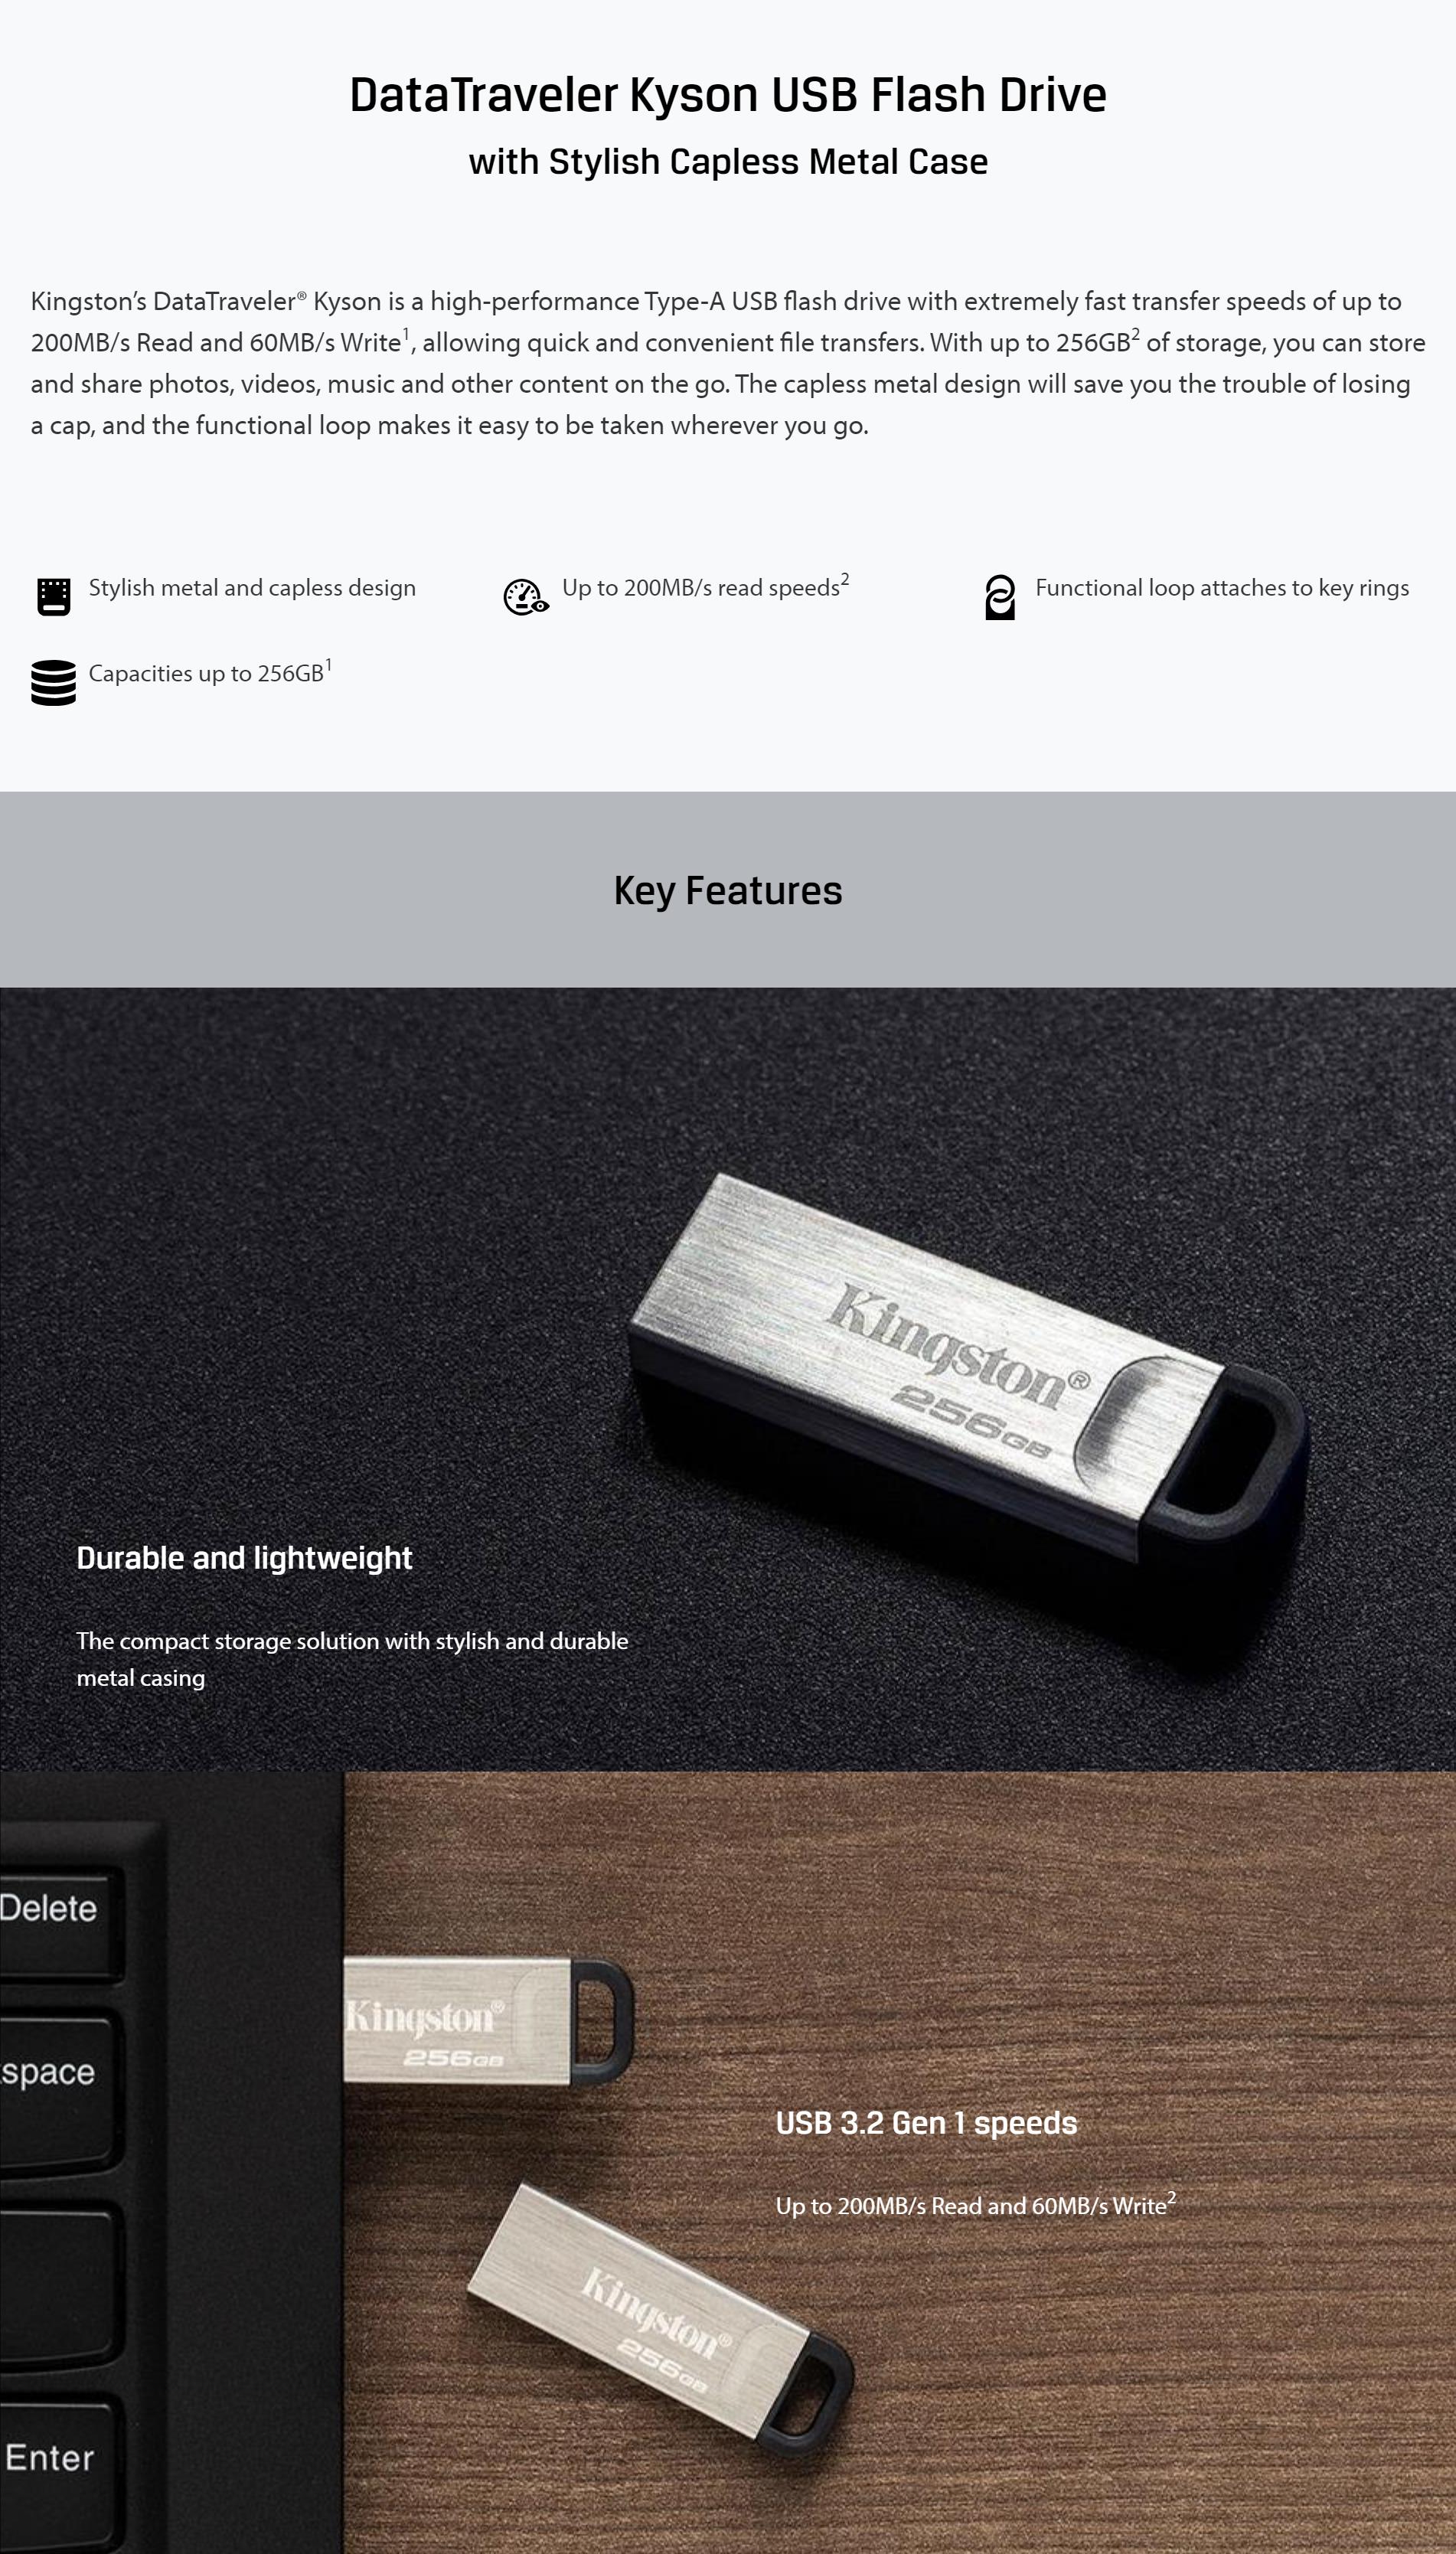 A large marketing image providing additional information about the product Kingston DataTraveler Kyson USB 3.2 256GB Flash Drive - Additional alt info not provided